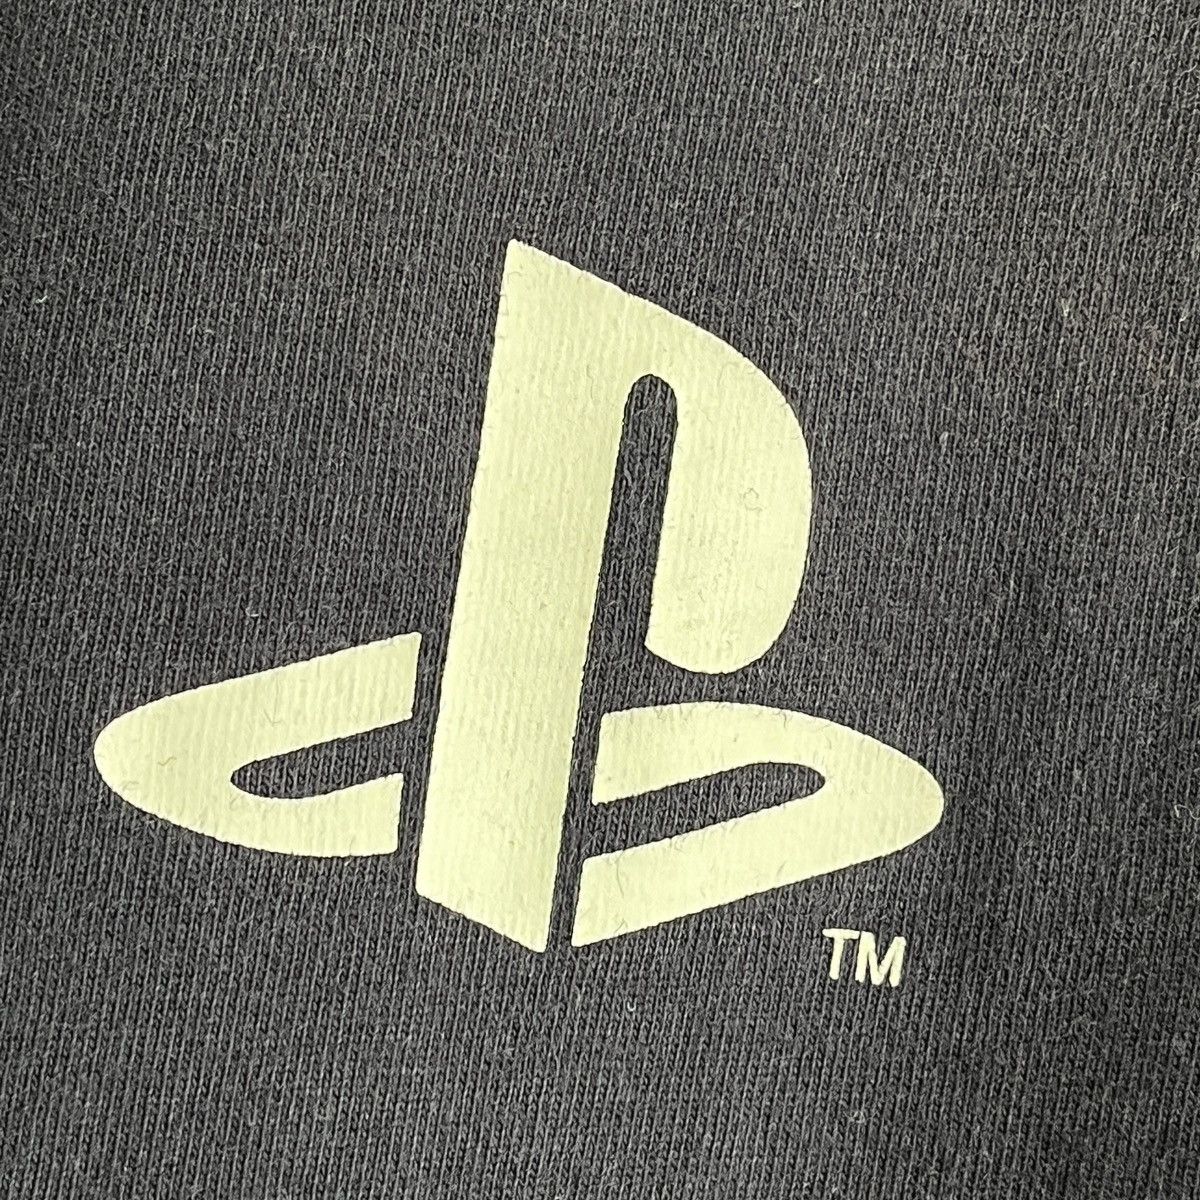 Playstation PS4 Promo TShirt Japan Official Licensed Product - 9